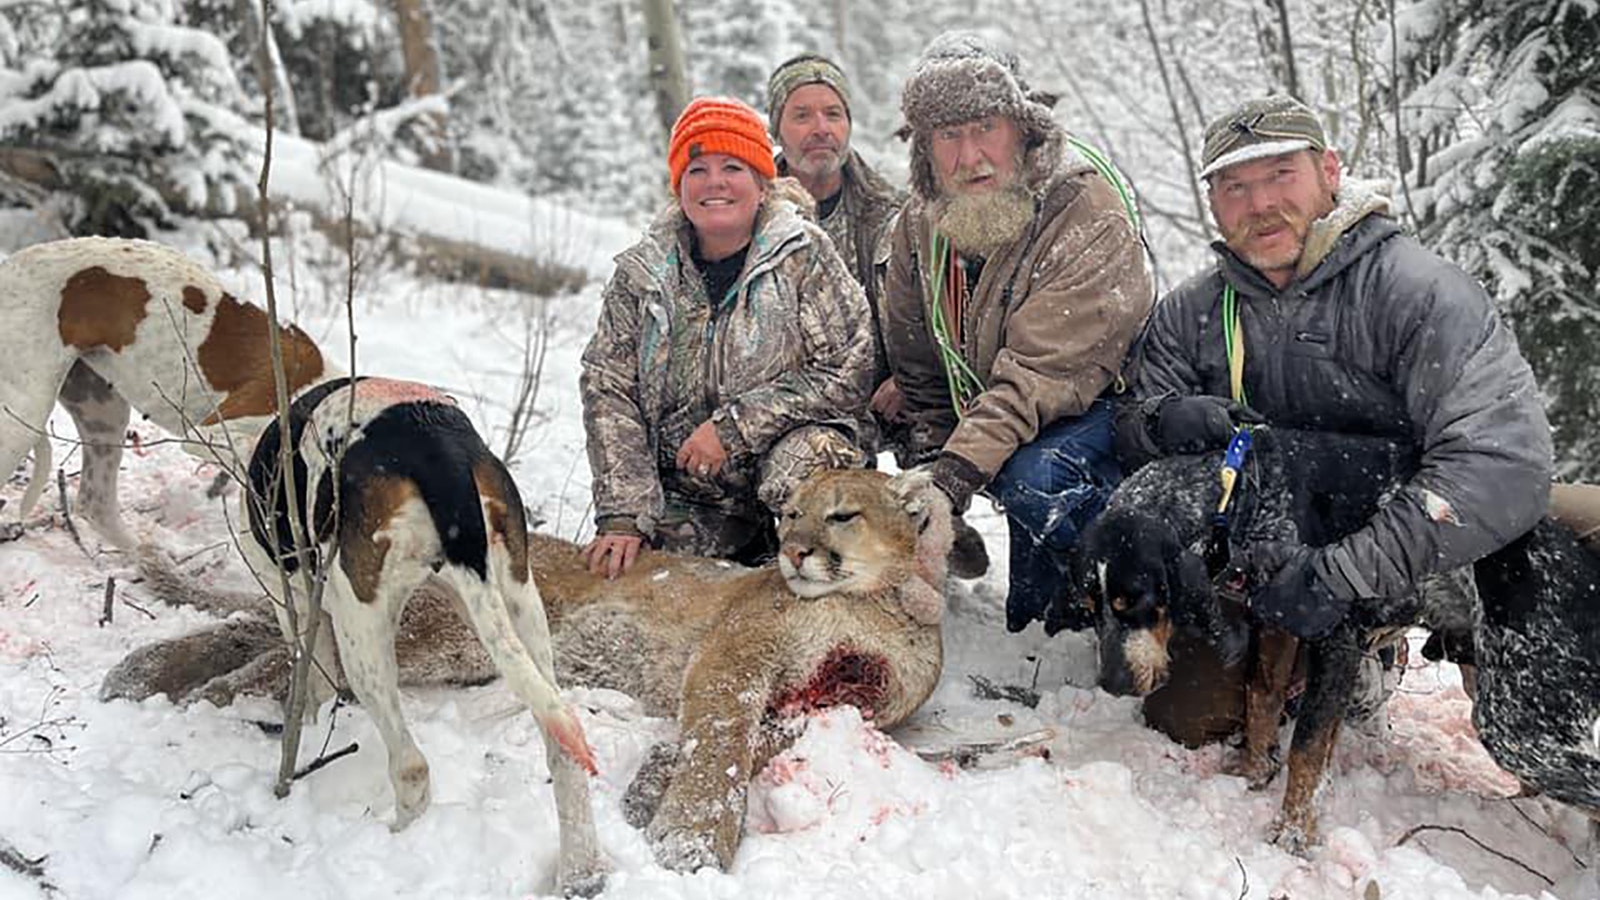 Doug Boykin and his sons guide hound hunts for mountain lions and bears in Wyoming and Arizona.